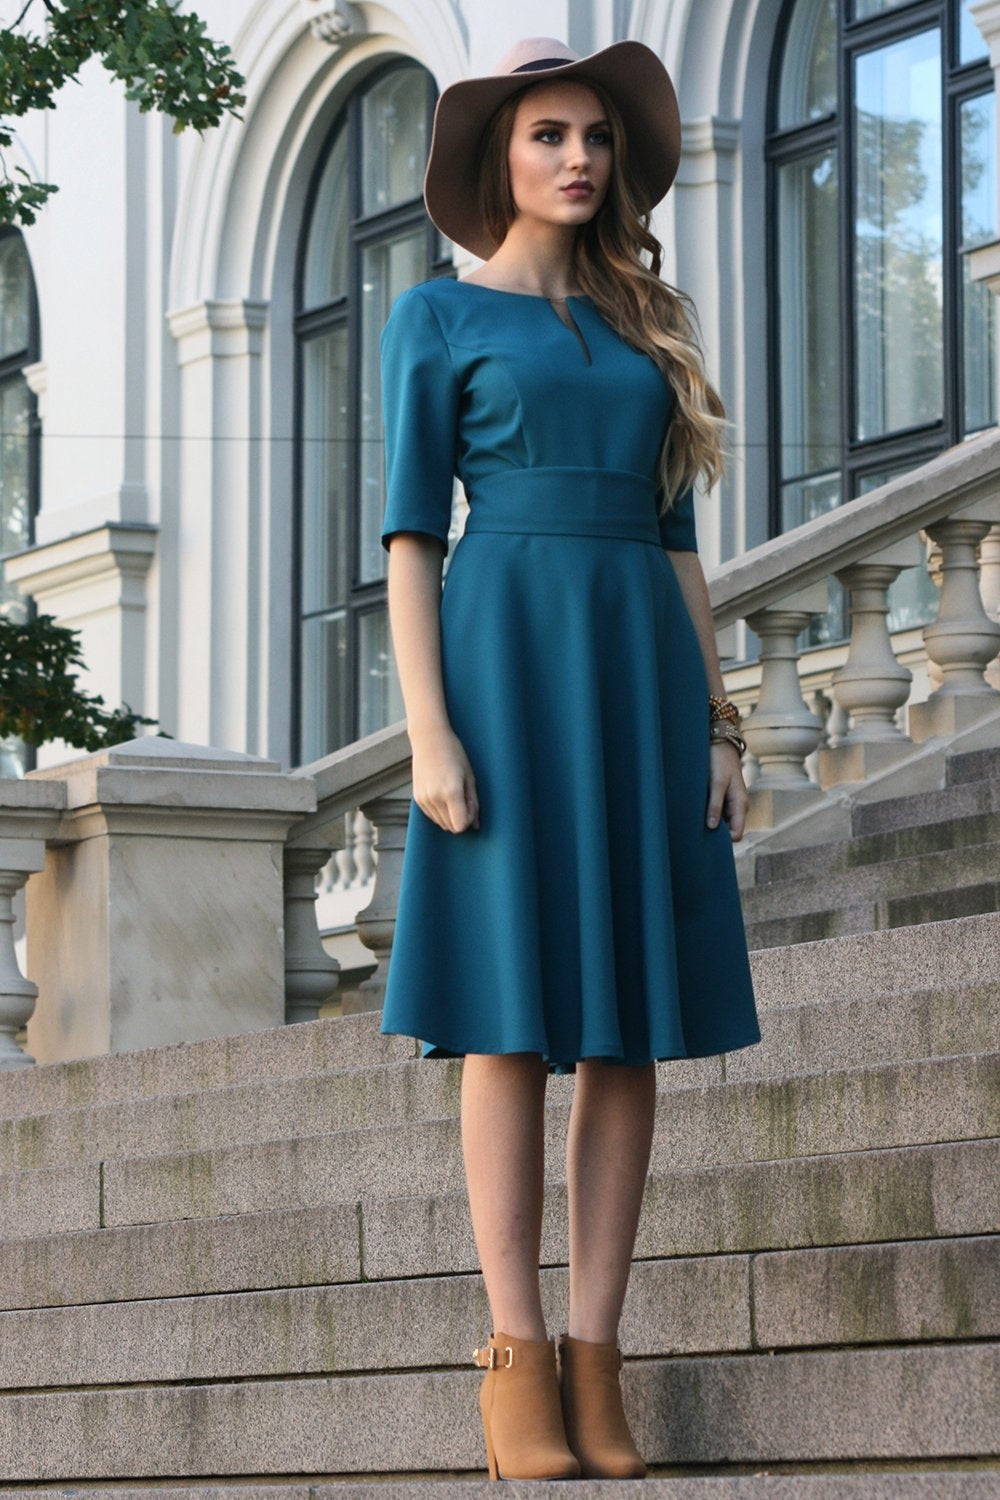 Blue green dress with circle skirts. Golden color detail in neckline